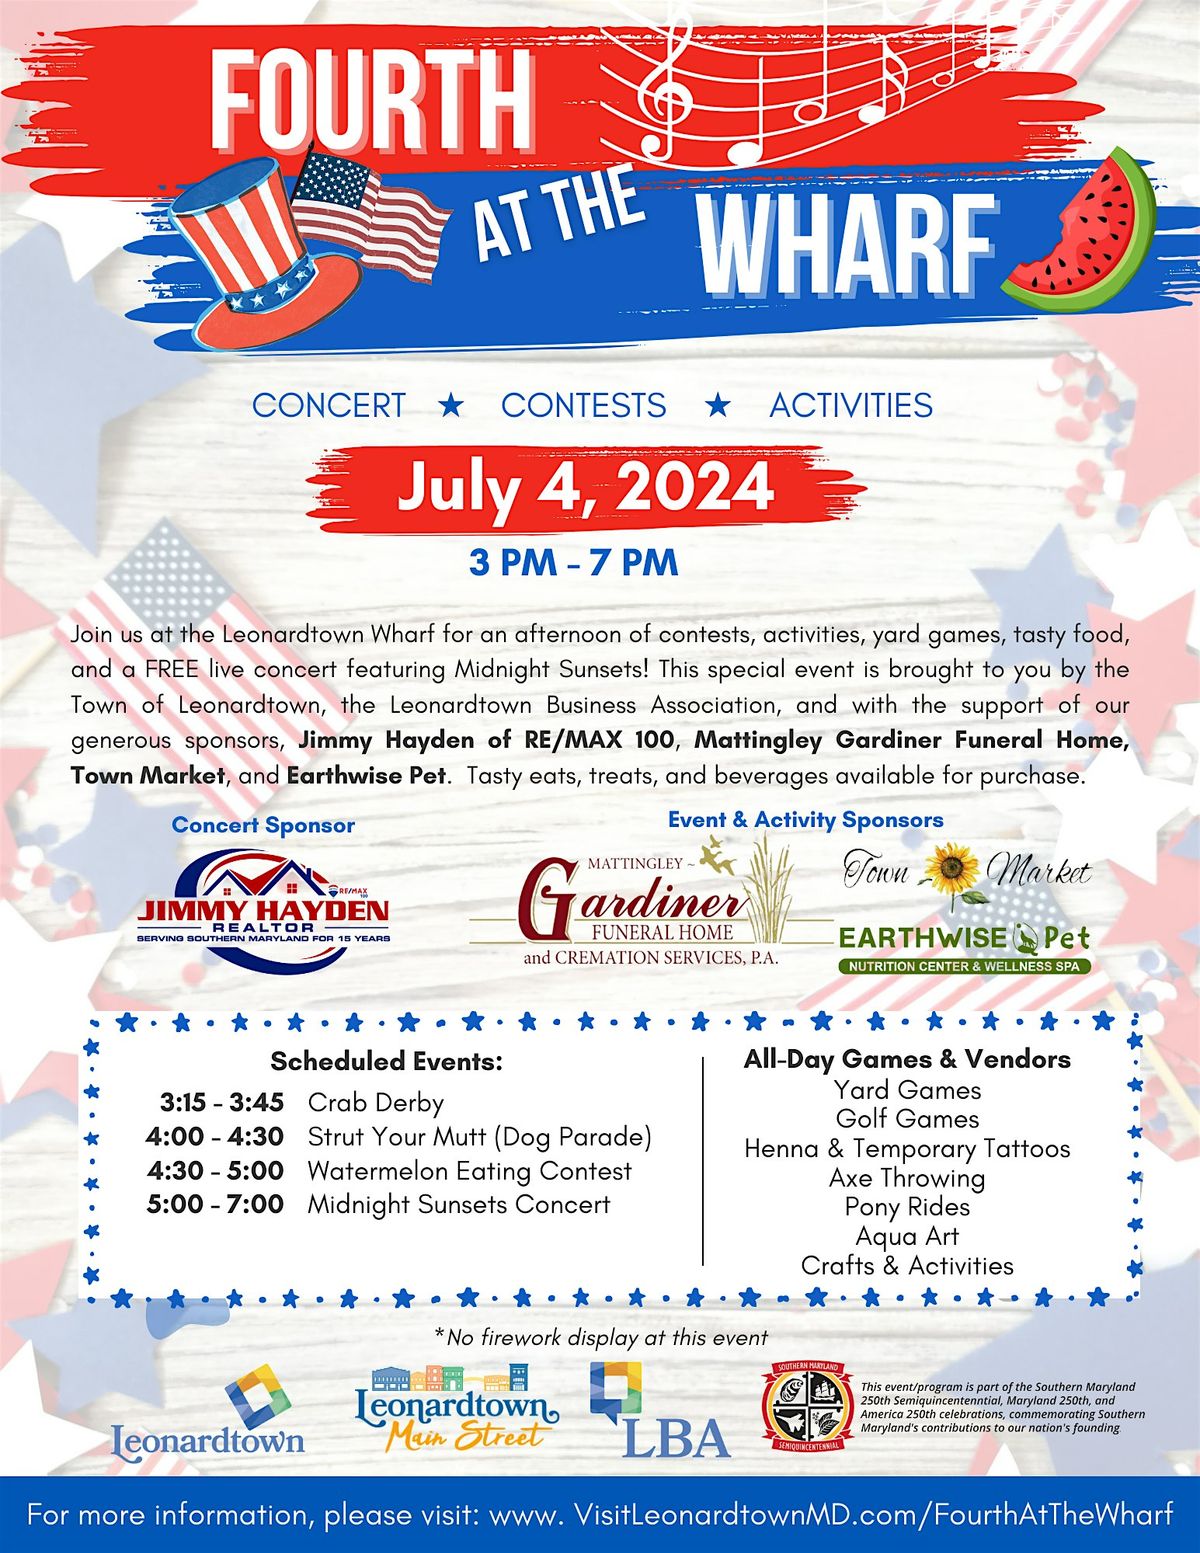 Fourth at the Wharf: Event & Concert